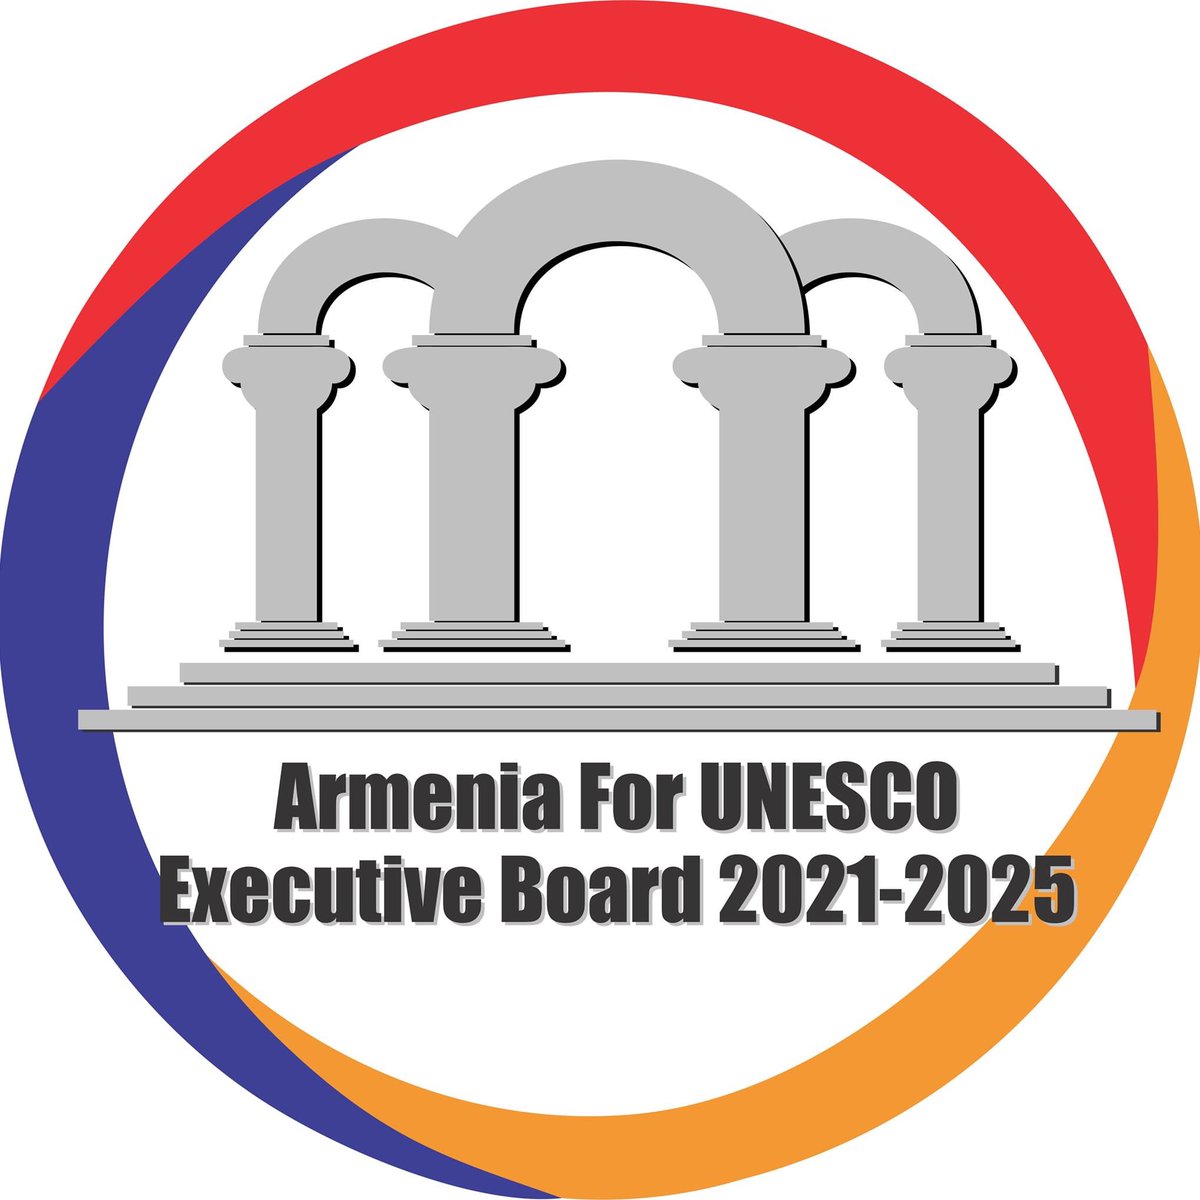 #Armenia has just been elected to the @UNESCO Executive Board for 2021-2025 at the #unescoGC with 146 votes. 

We are grateful for the trust of the Int community & we look forward to continuing to contribute to the implementation of #UNESCO global priorities. 
#AMINUNESCOEXB